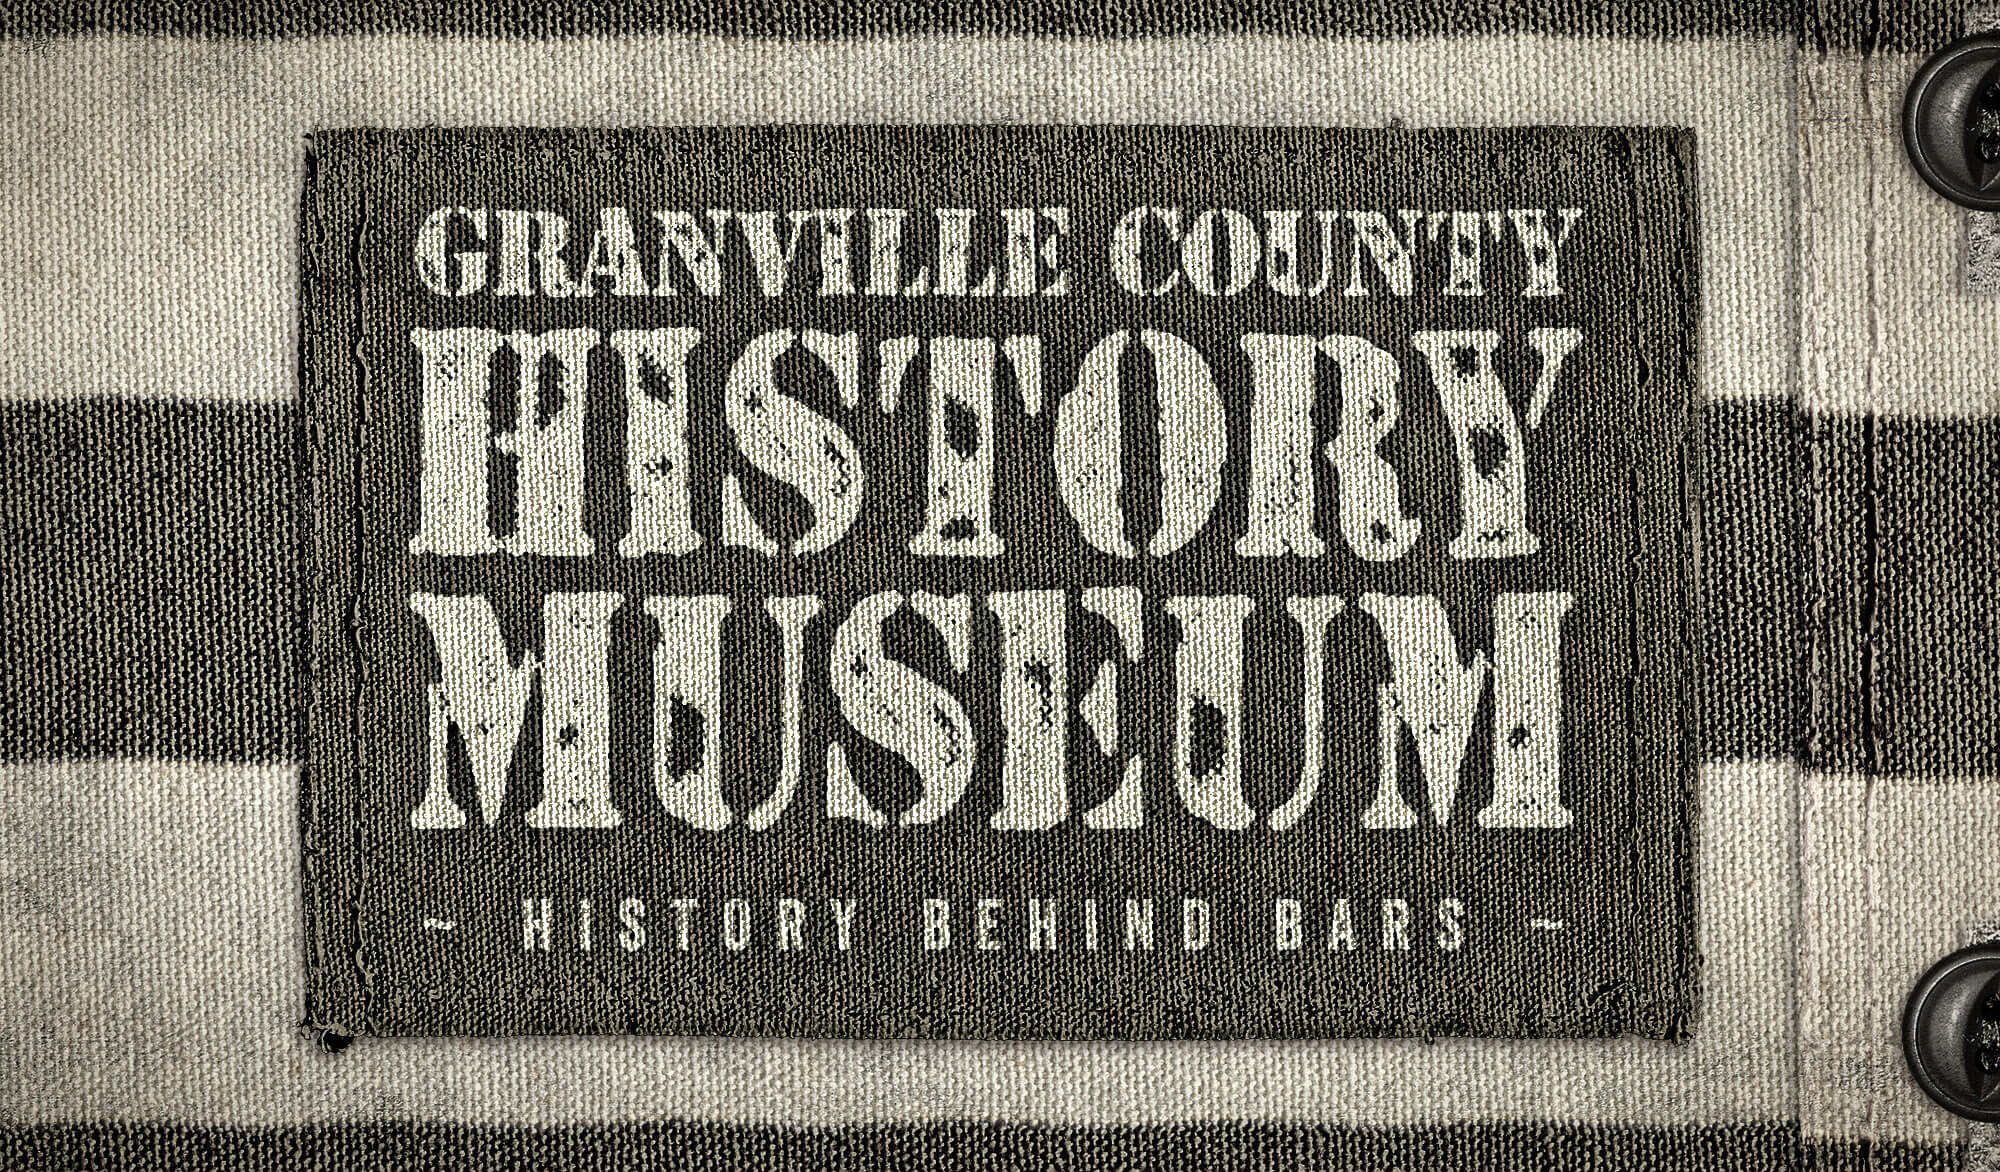 Granville County History Museum